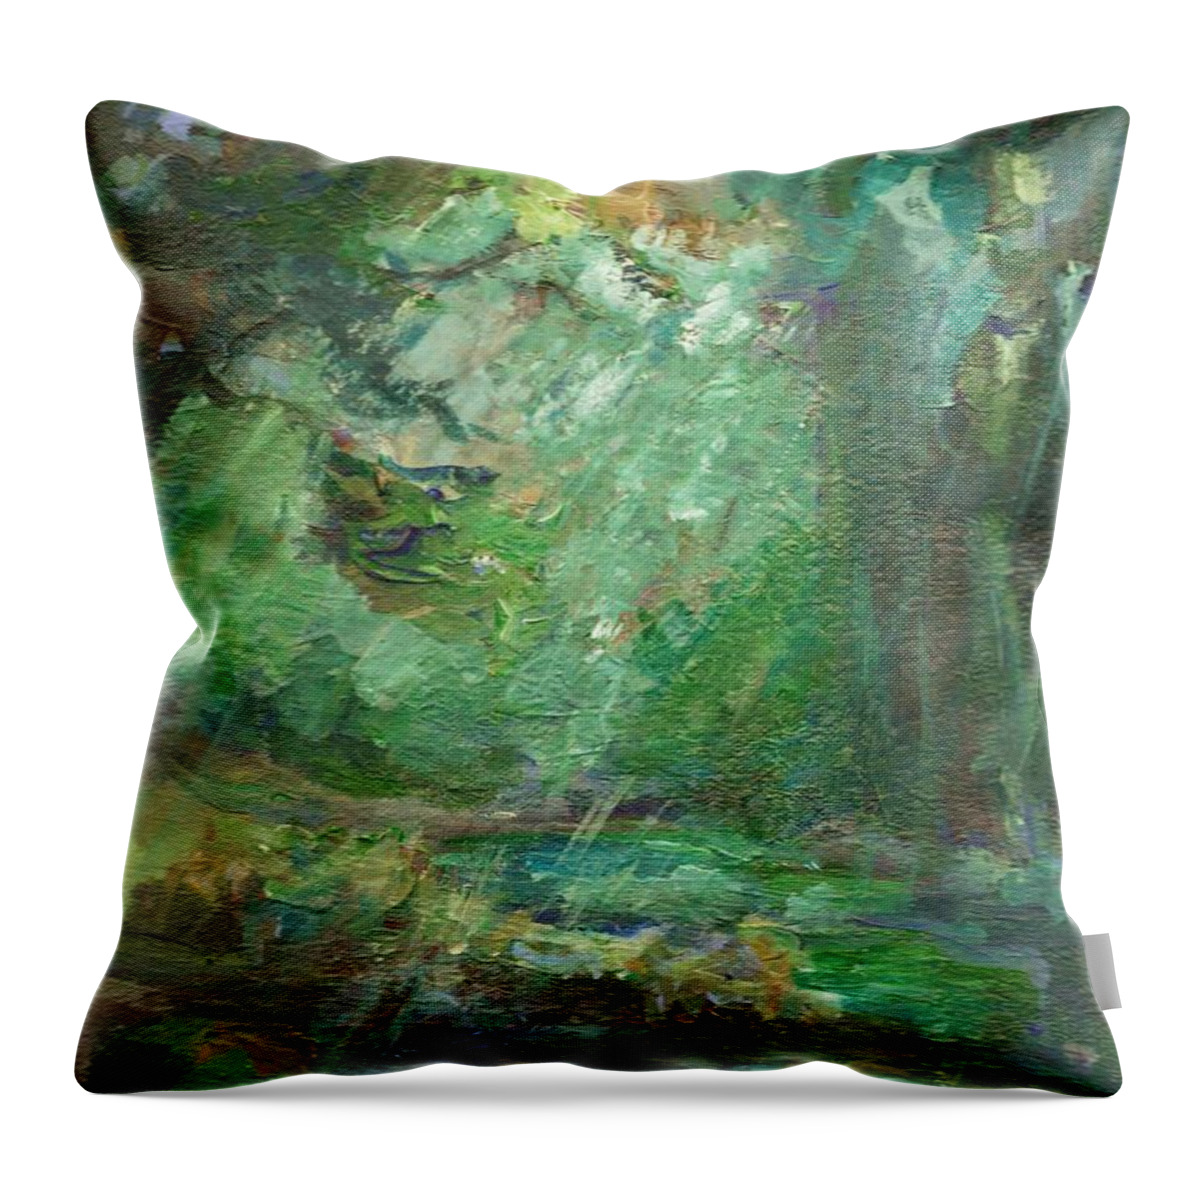 Landscape Throw Pillow featuring the painting Rainy Woods by Mary Wolf